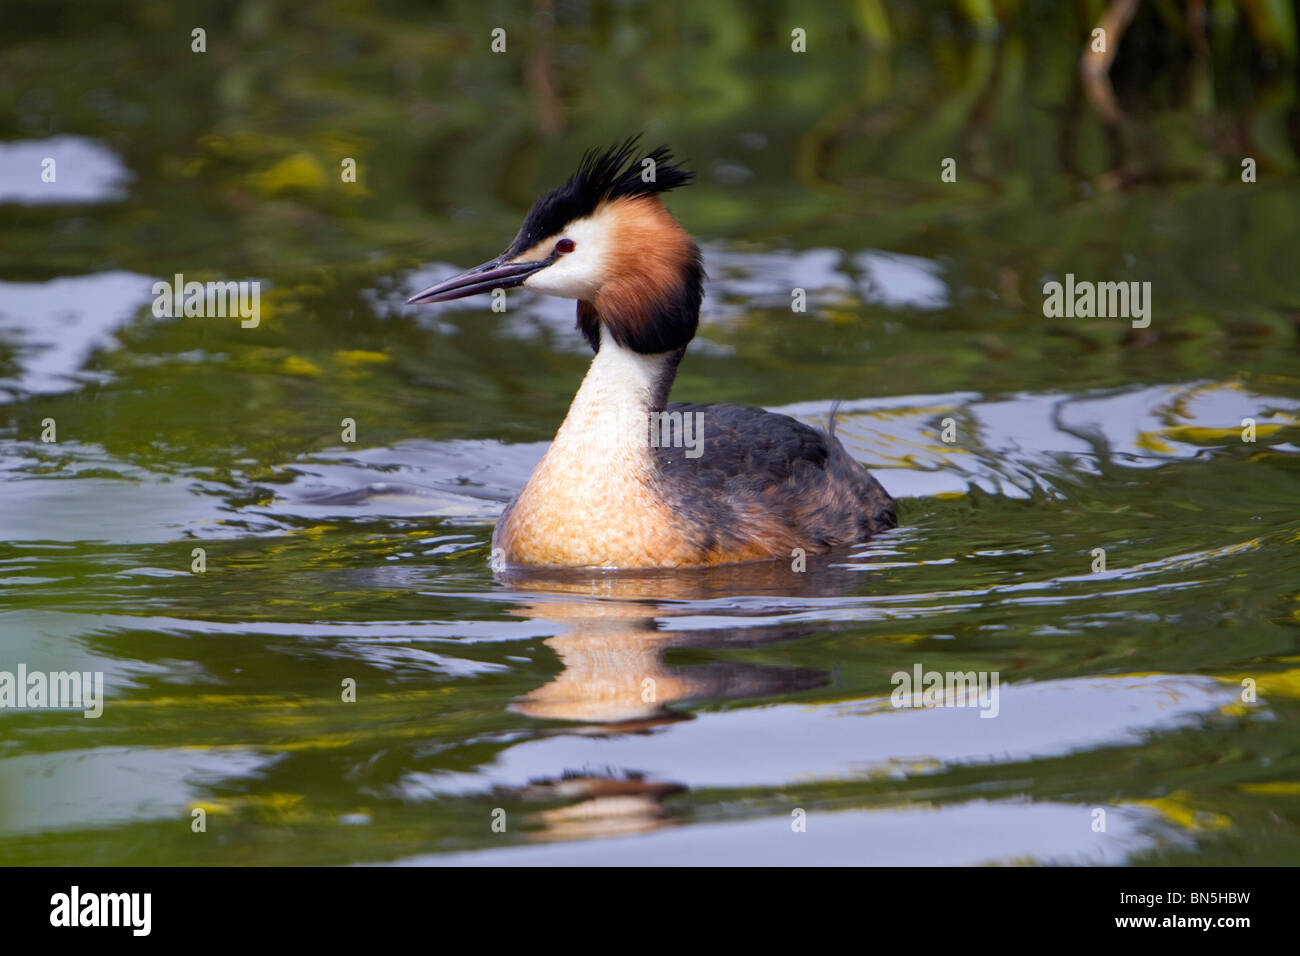 Great Crested Grebe; Podiceps cristatus; on water Stock Photo